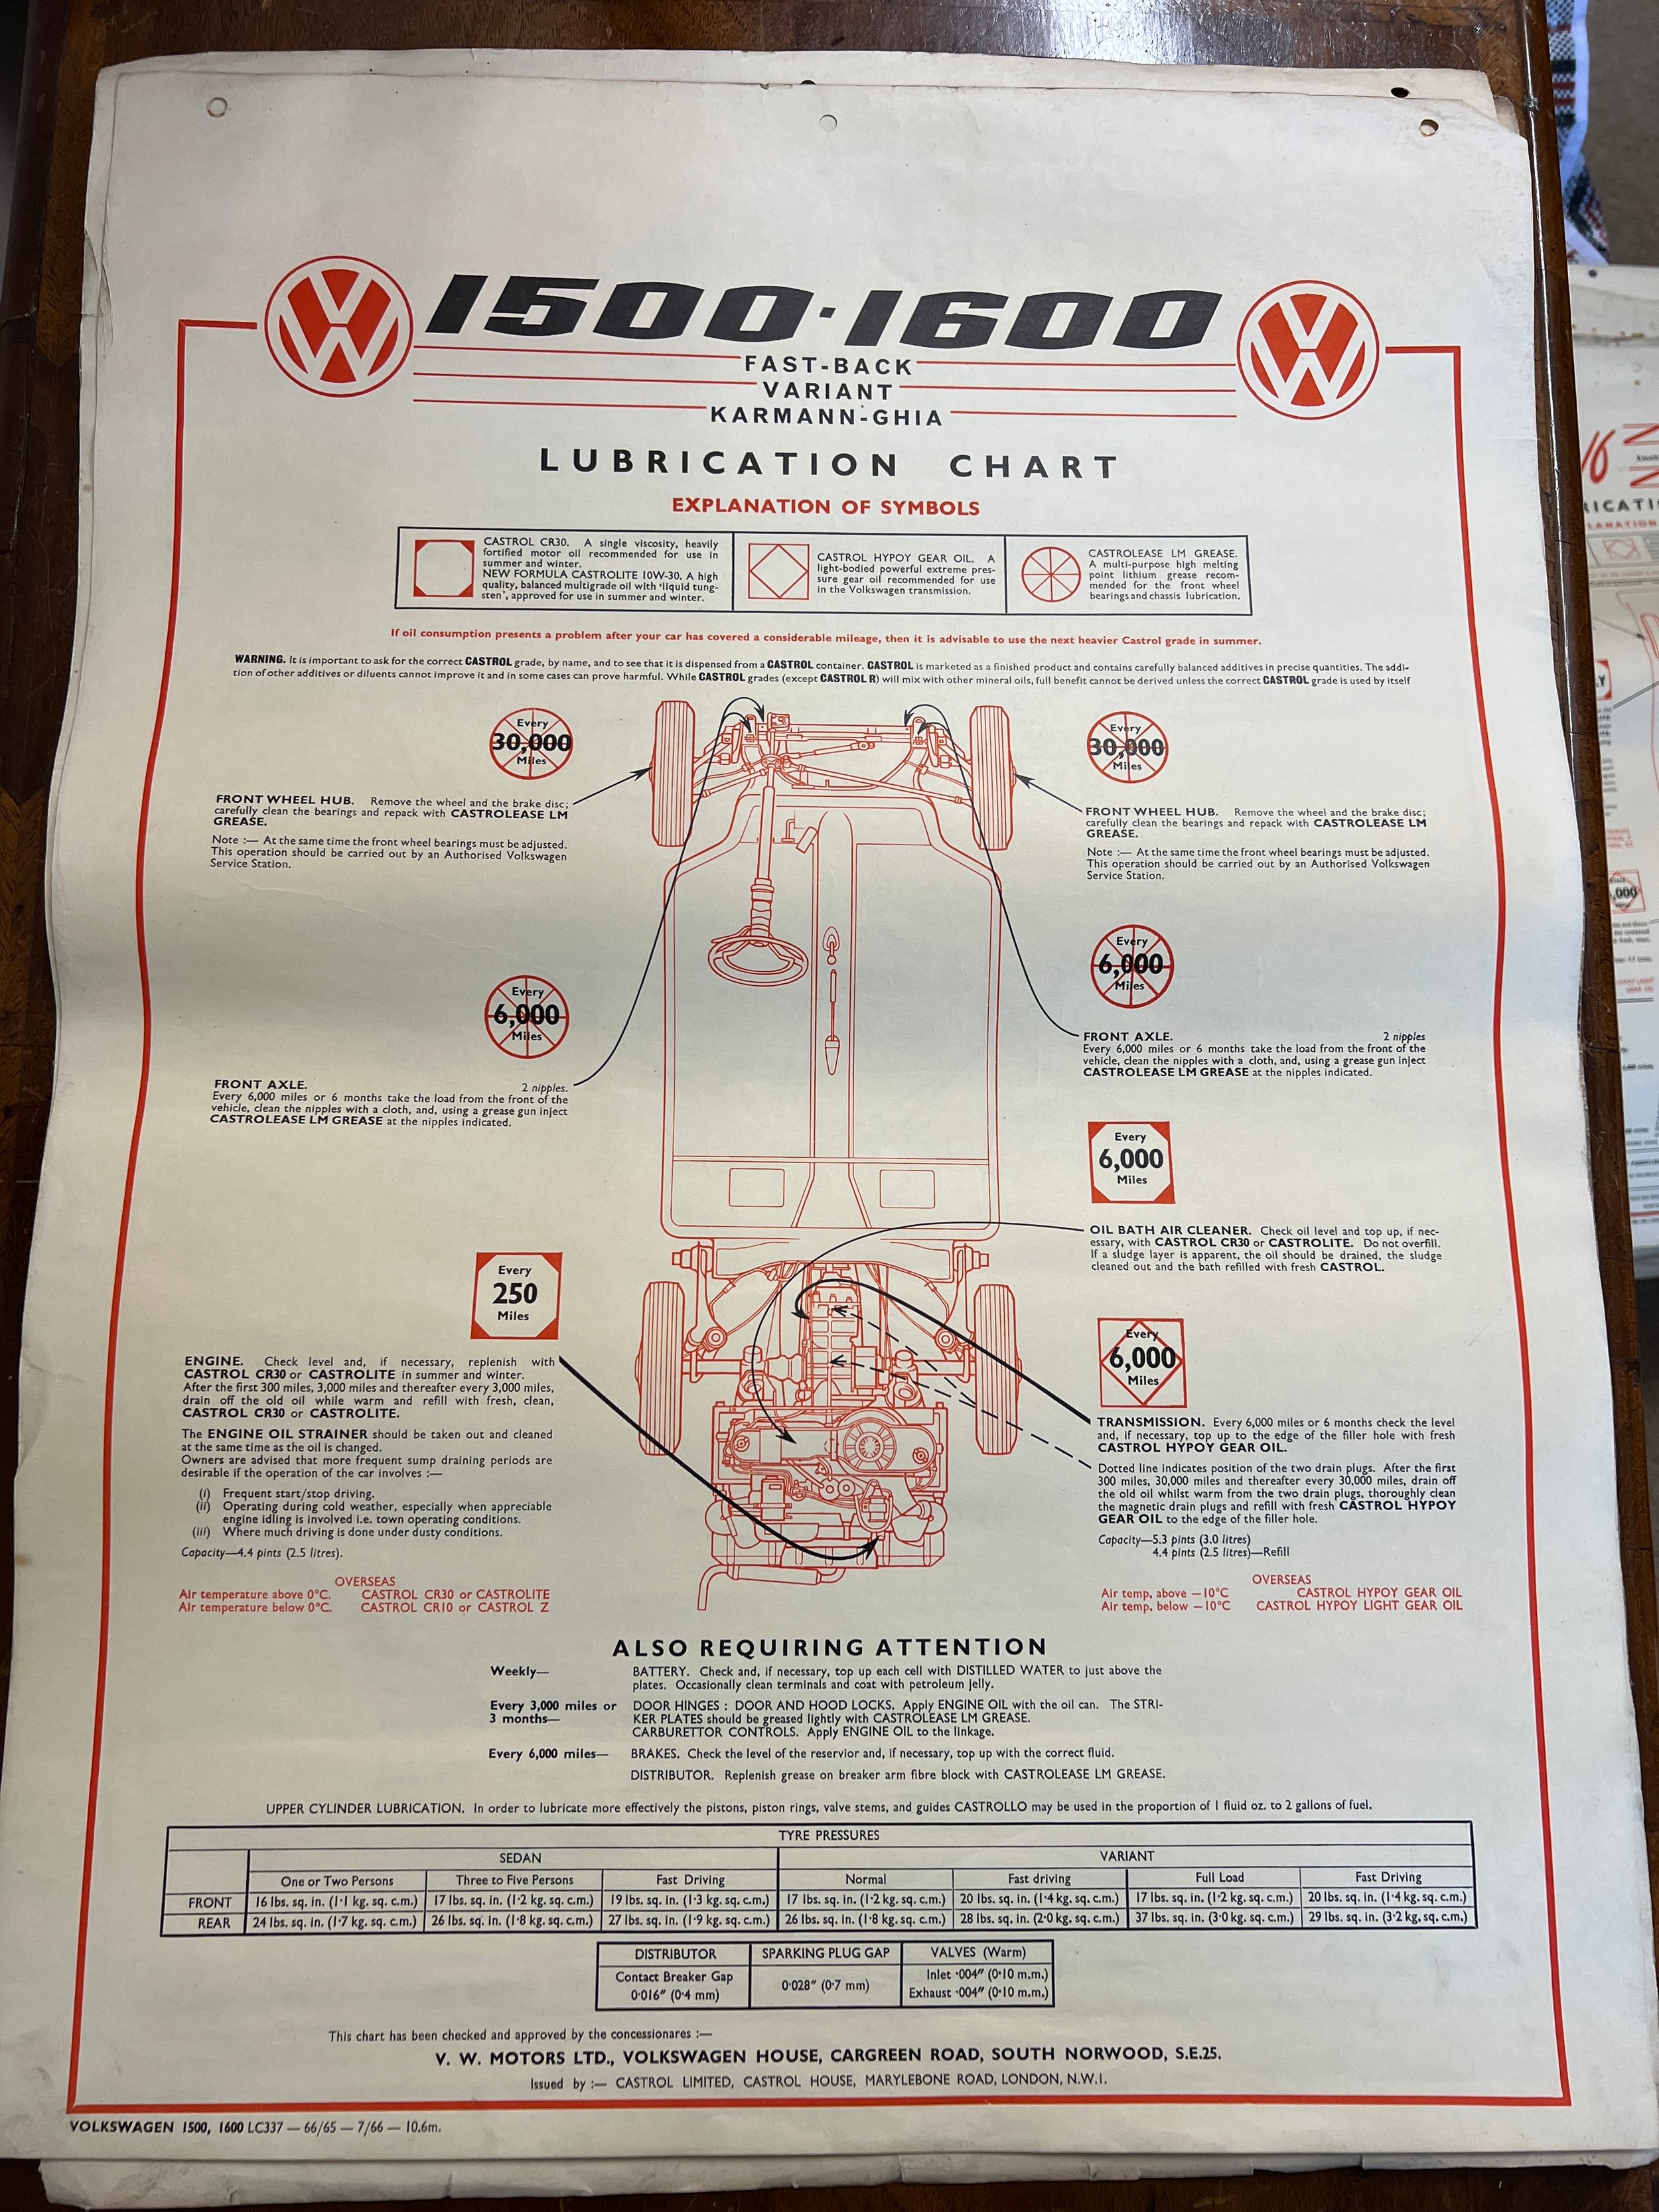 Thirty one vintage car lubrication charts to include Wolseley, Morris, MG 1100, Morris 1100, - Image 28 of 31